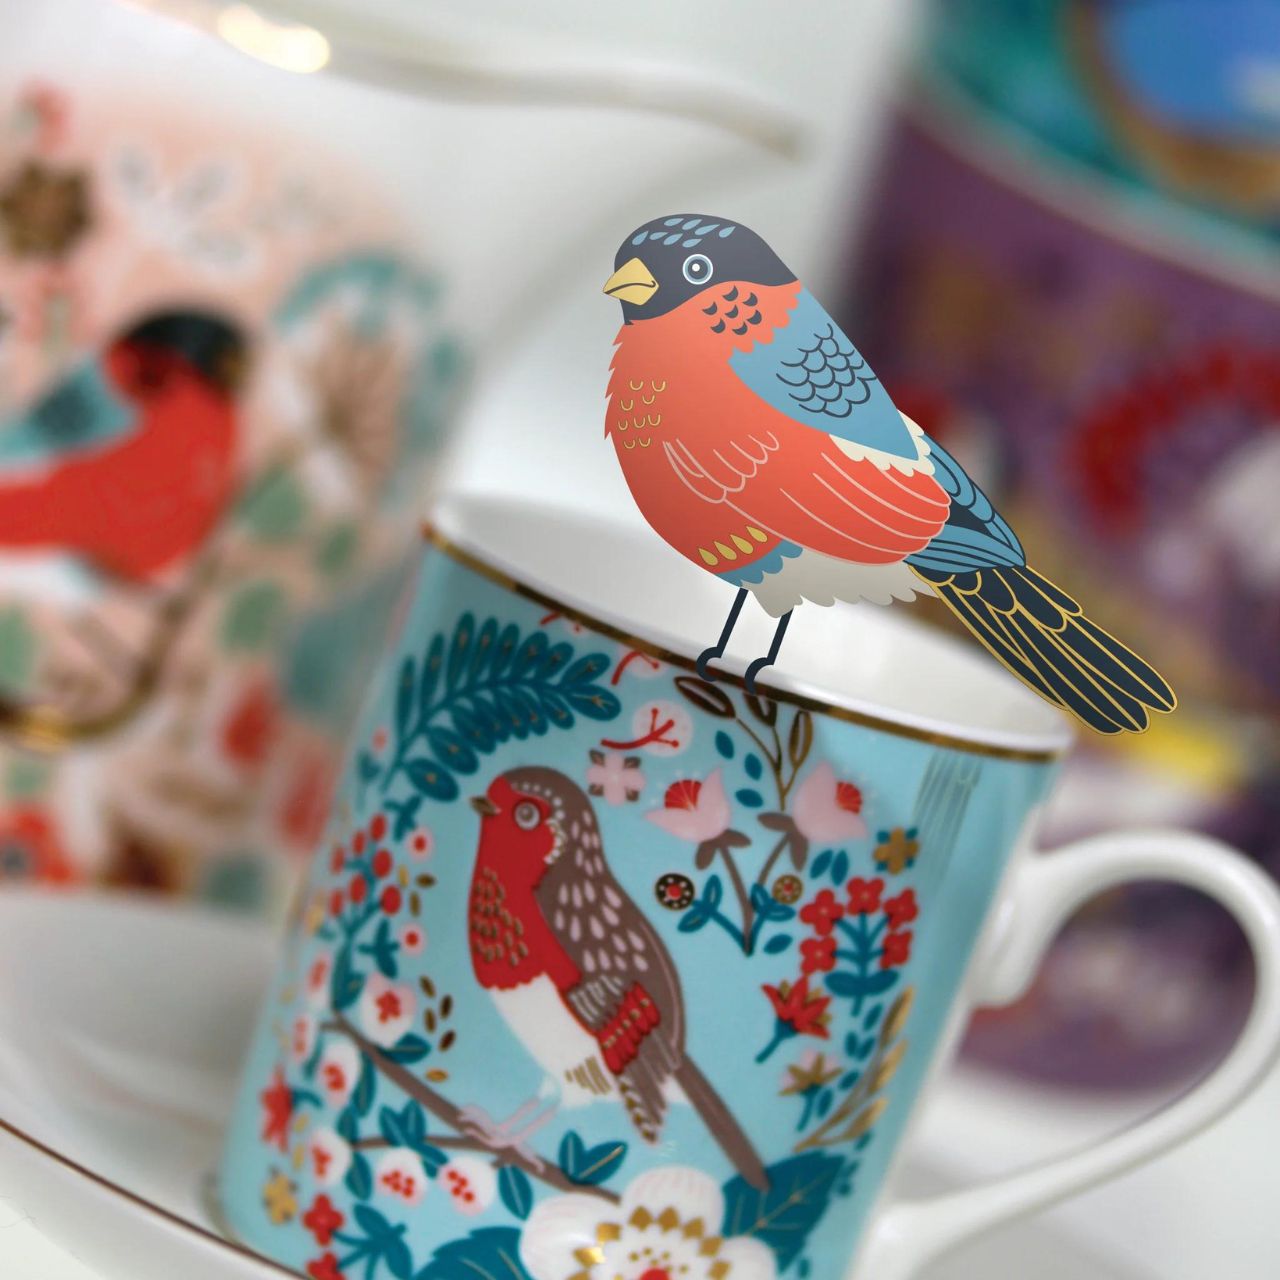 Tipperary Crystal Birdy Set of 2 Robin & Blue Tit Espresso Cups  The Birdy Collection is a series of 6 exclusively commissioned illustrations inspired by native Irish birds; Bullfinch, Goldfinch, Blue tit, Greenfinch, Kingfisher and Robi